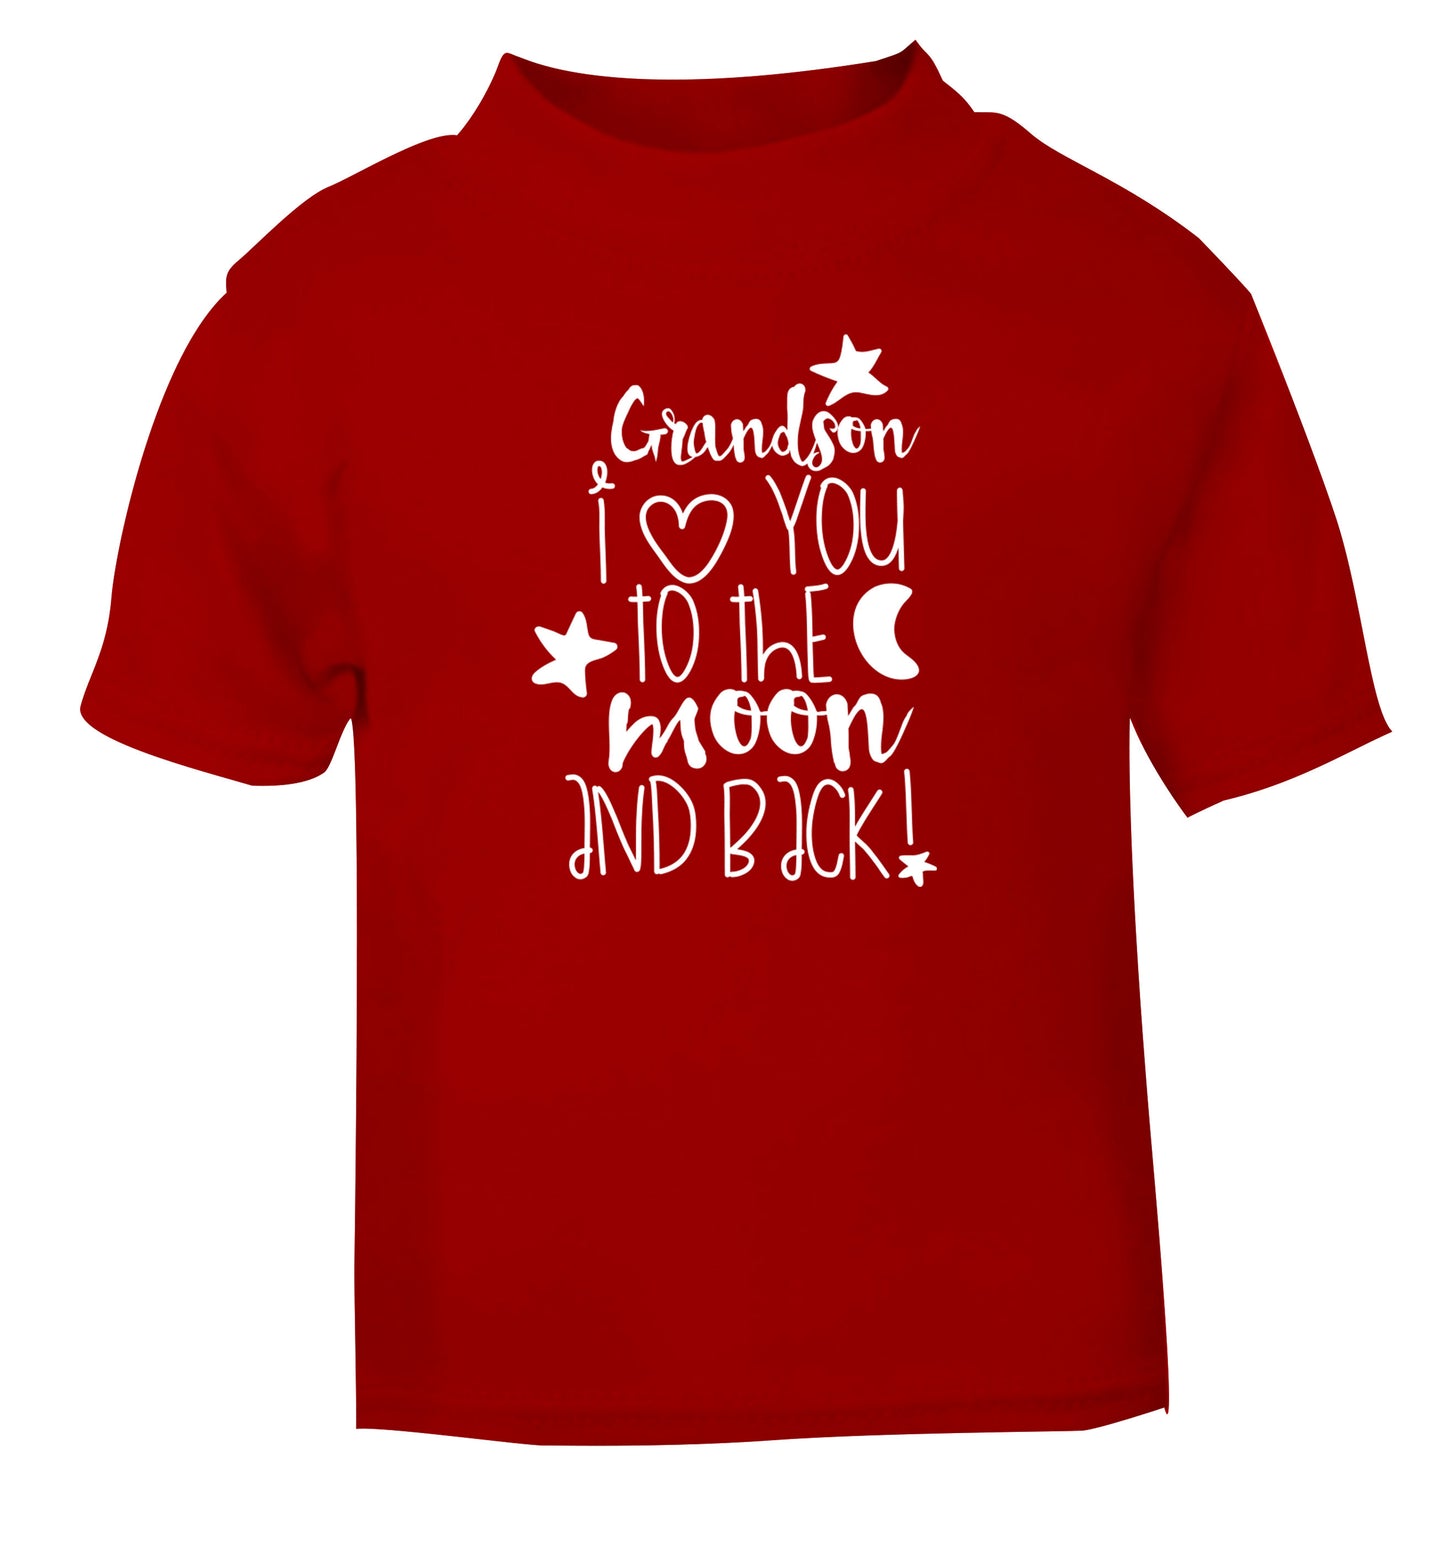 Grandson I love you to the moon and back red Baby Toddler Tshirt 2 Years